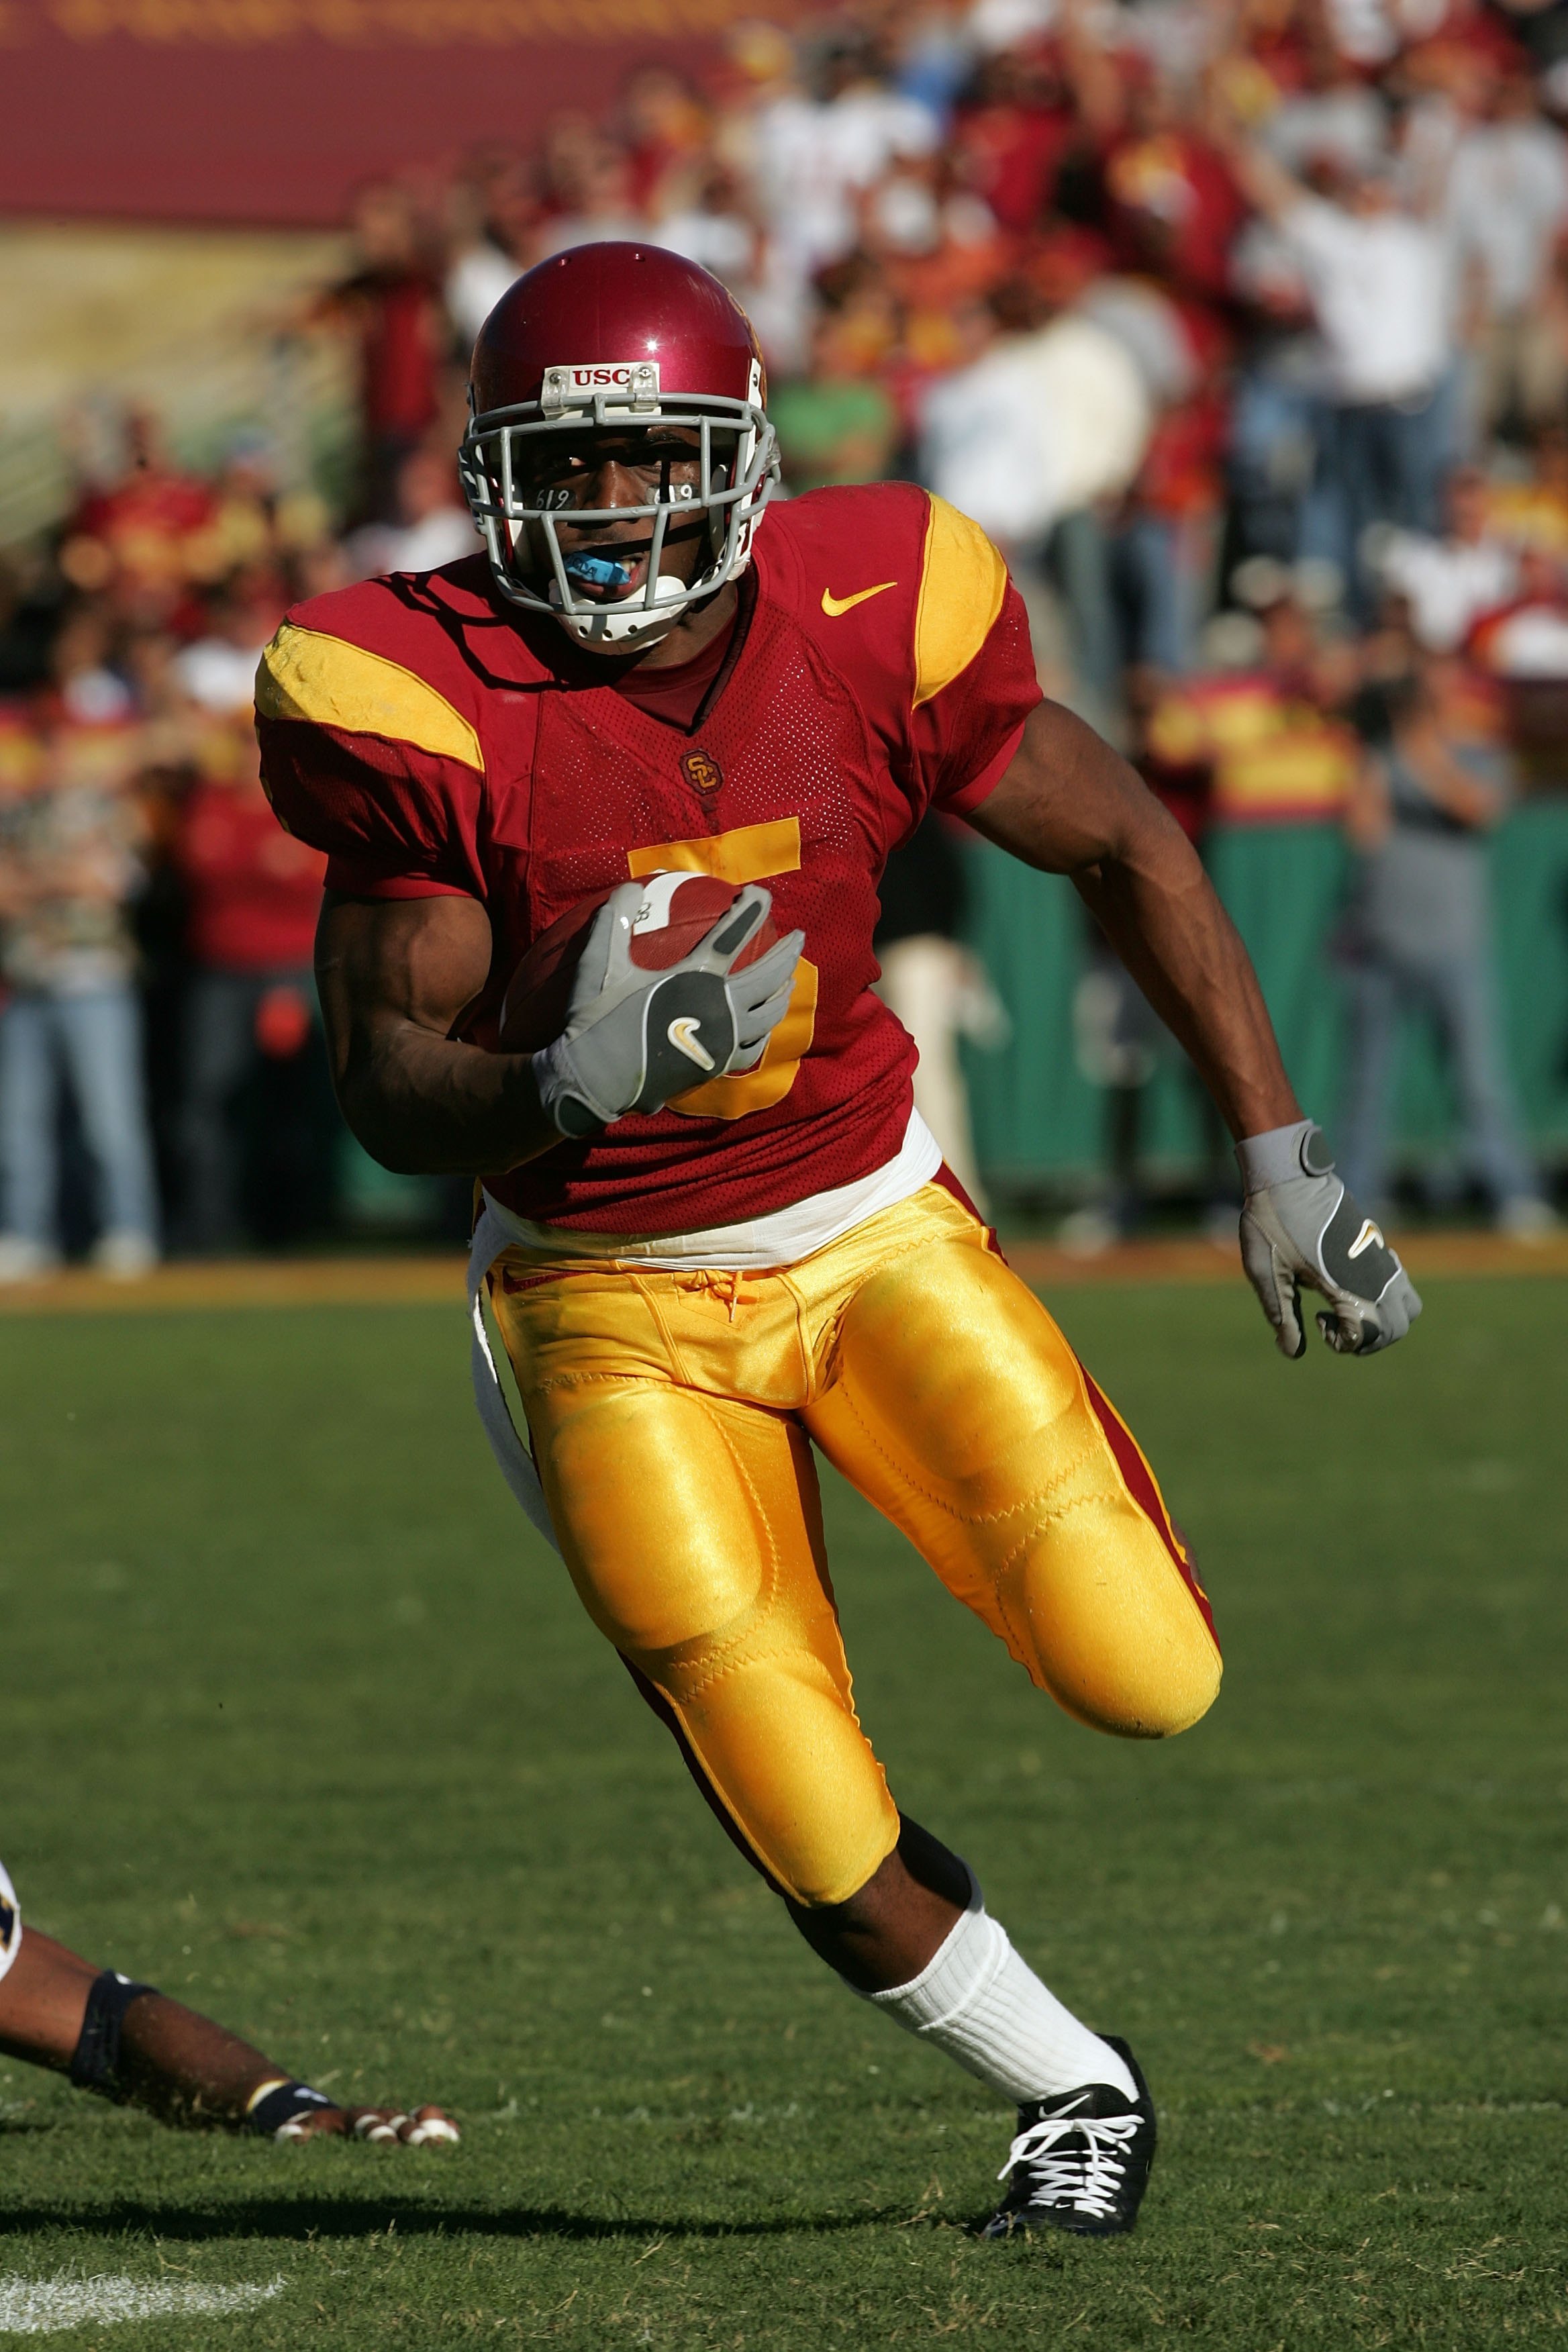 LOS ANGELES, CA - DECEMBER 03: (FILE PHOTO) Reggie Bush #5 of the USC Trojans rushes the ball against the UCLA Bruins December 3, 2005 at the Los Angeles Memorial Coliseum in Los Angeles, California. Bush was picked second overall by the New Orleans Saint